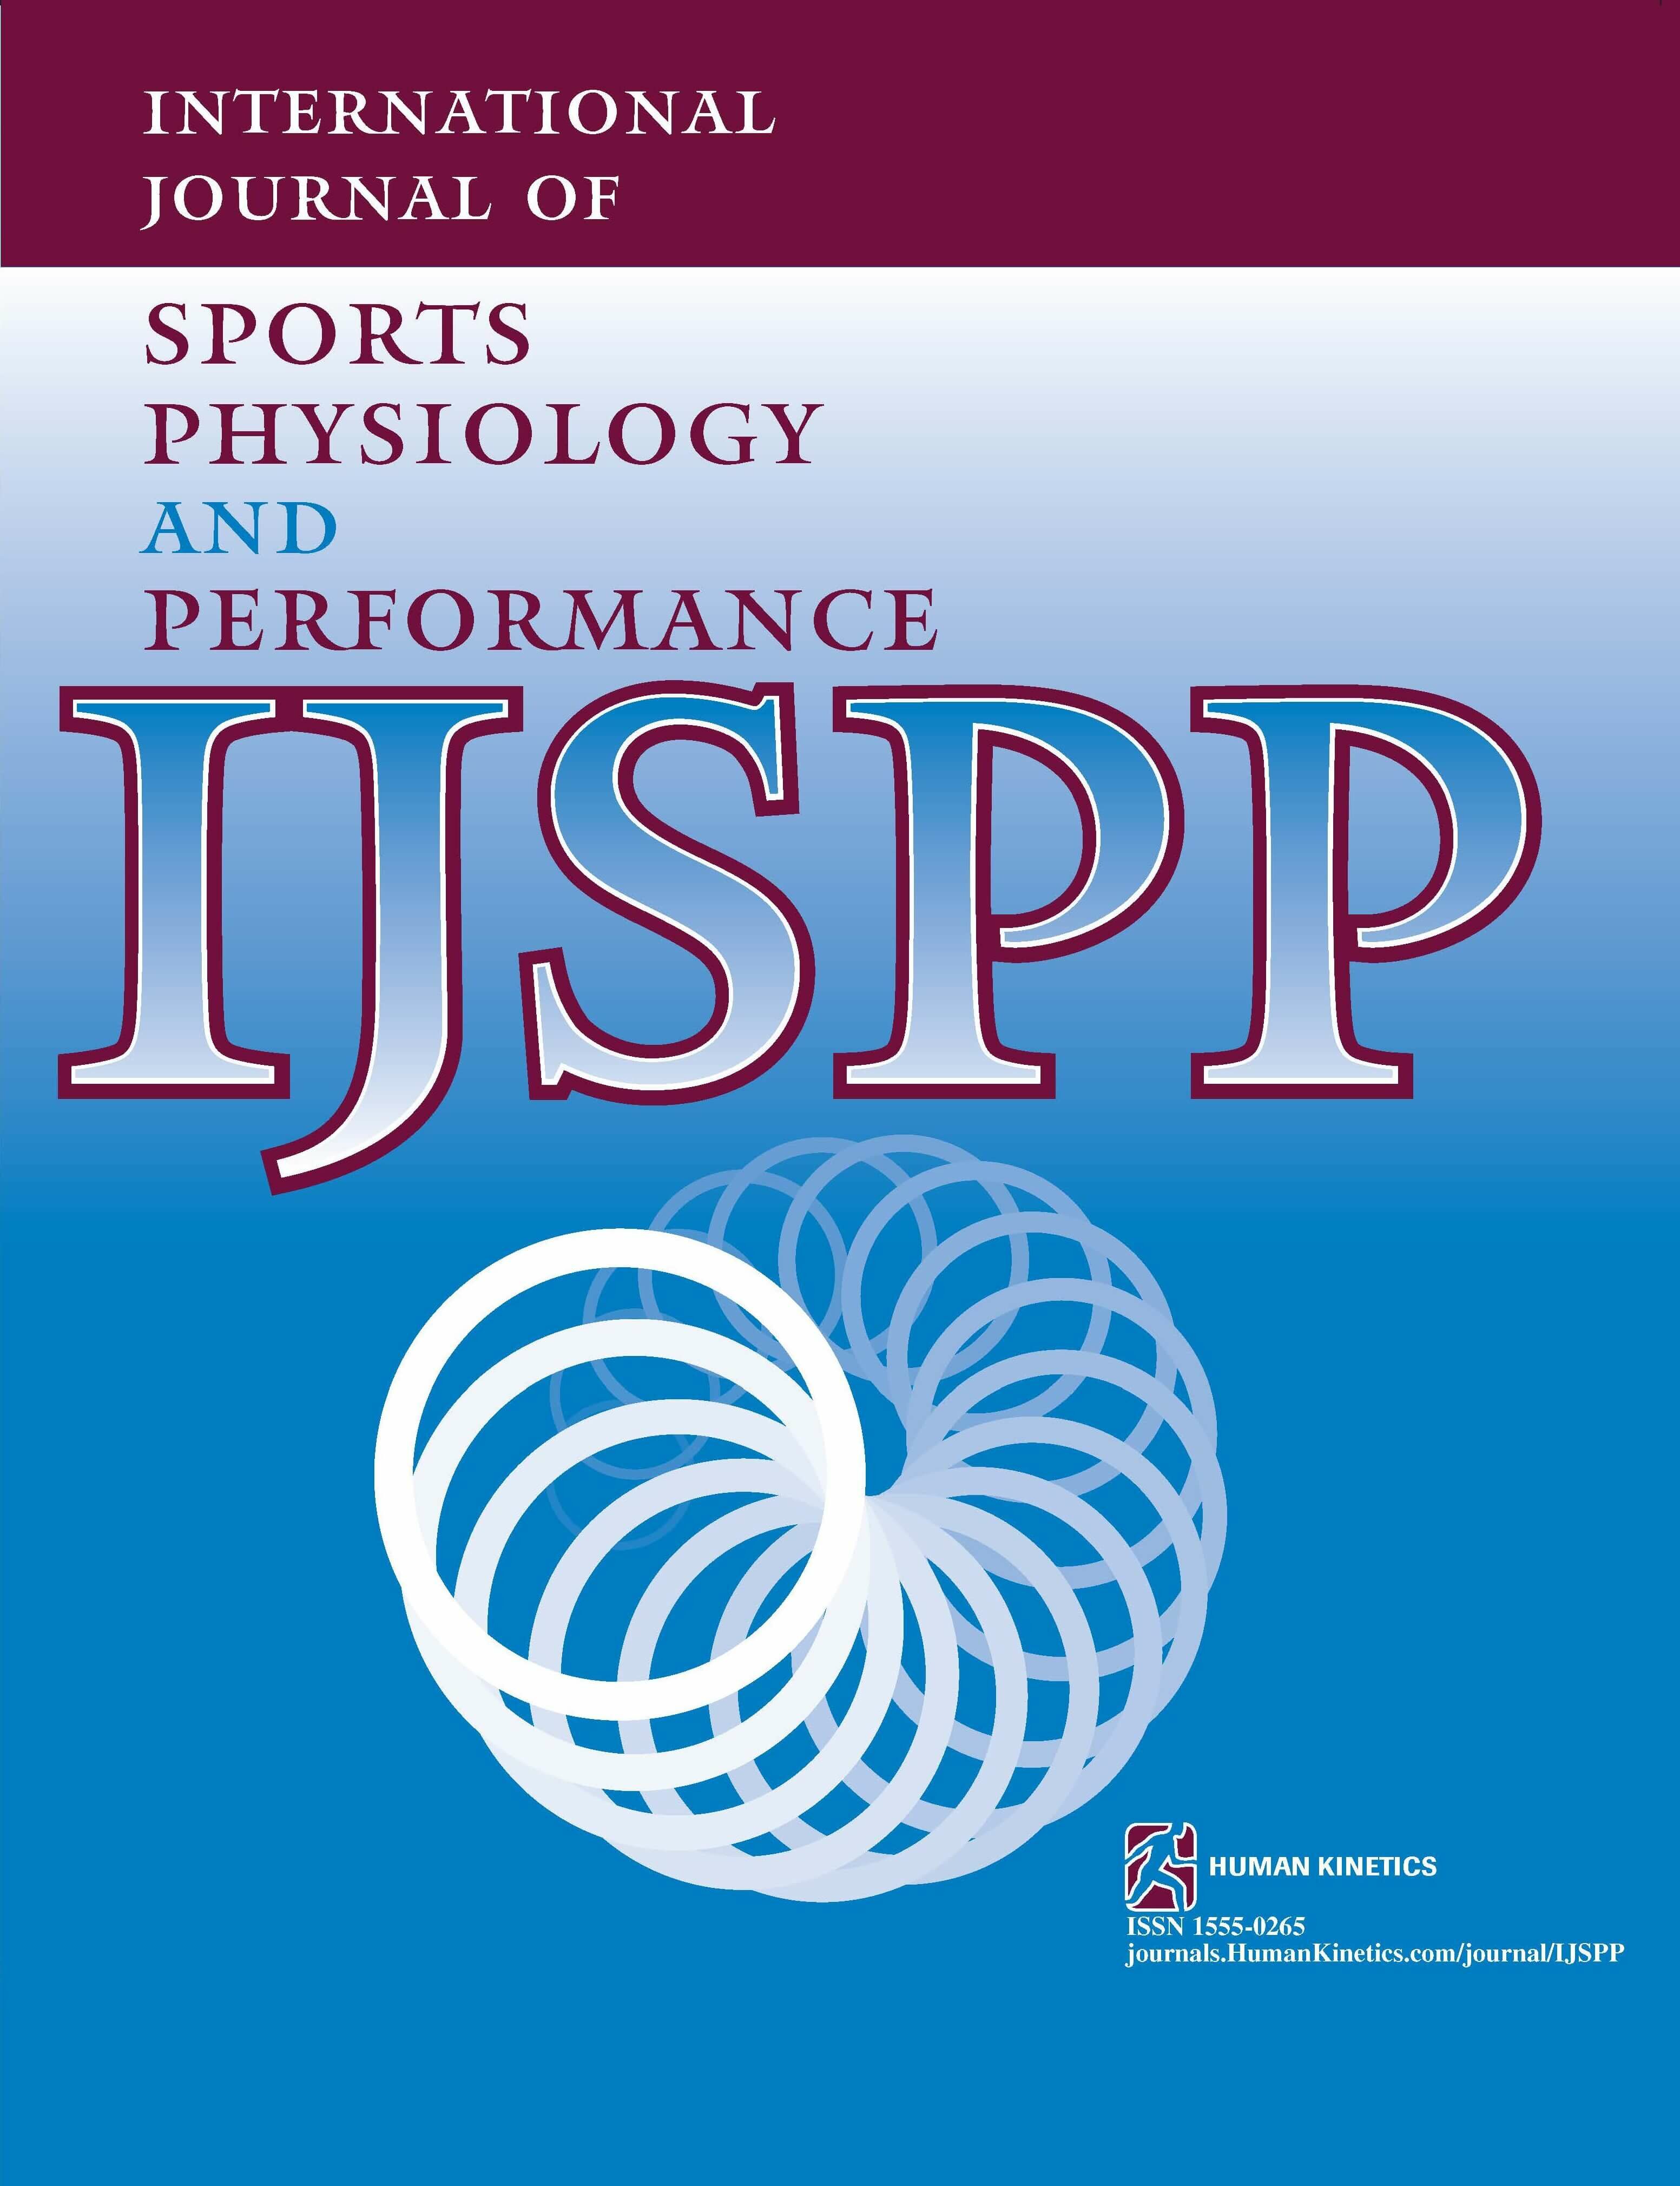 Performance-Determining Variables of a Simulated Sprint Cross-Country Skiing Competition